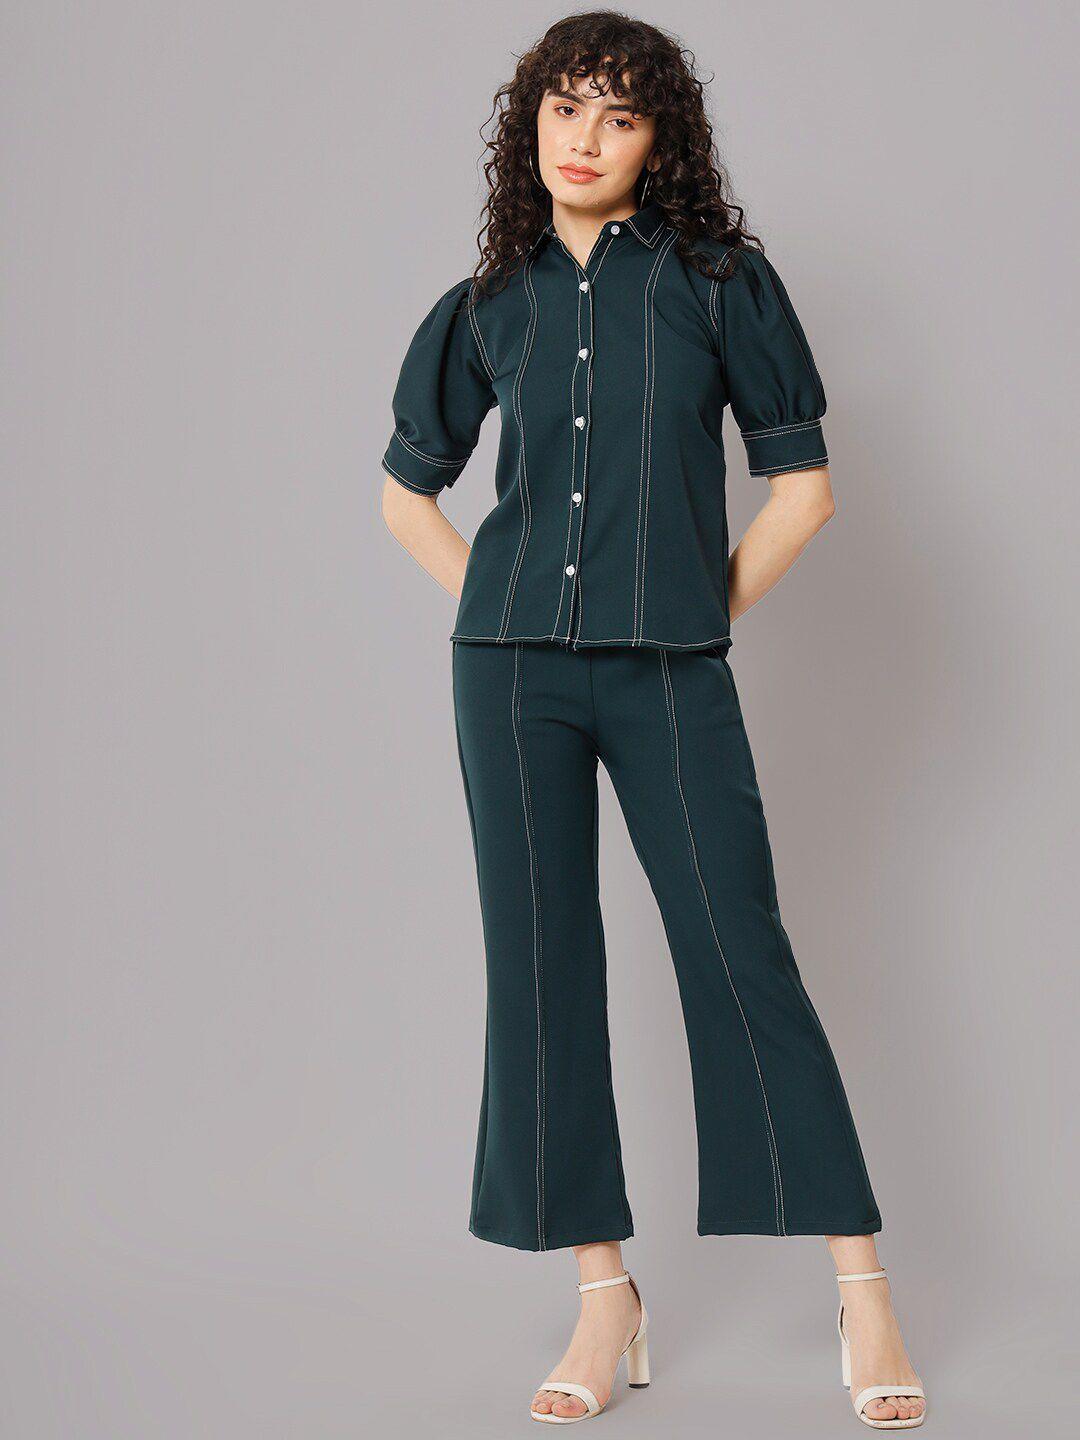 bcz style puffed sleeves shirt with bell bottom trouser